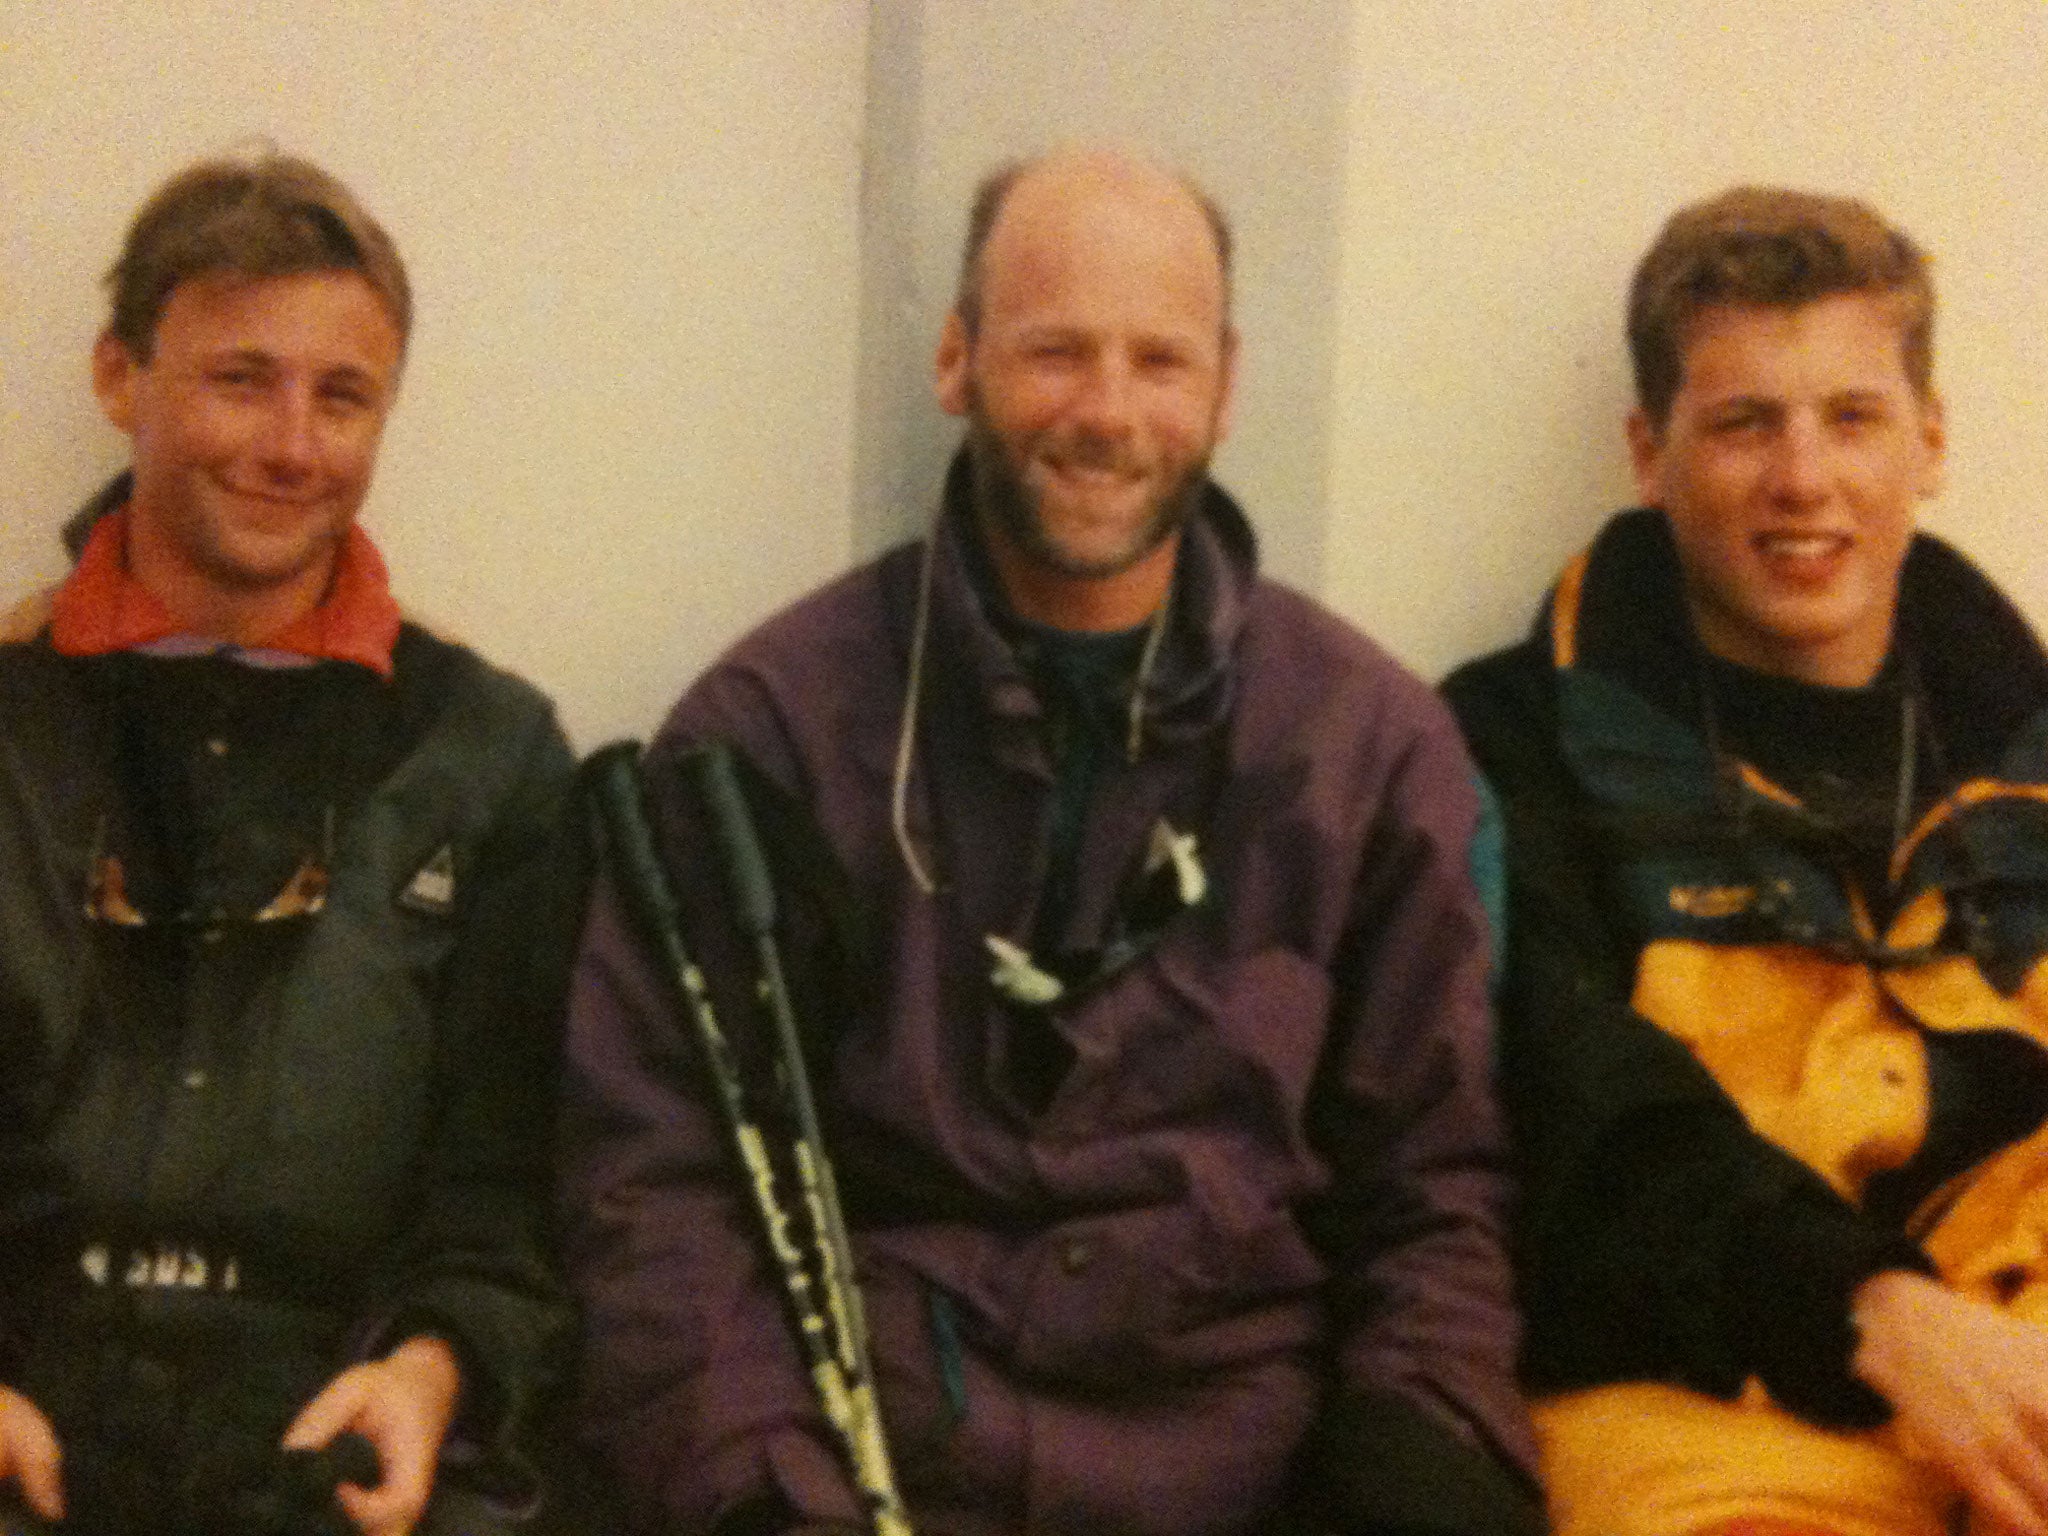 Patrick, left, and Simon with their father, circa 1998